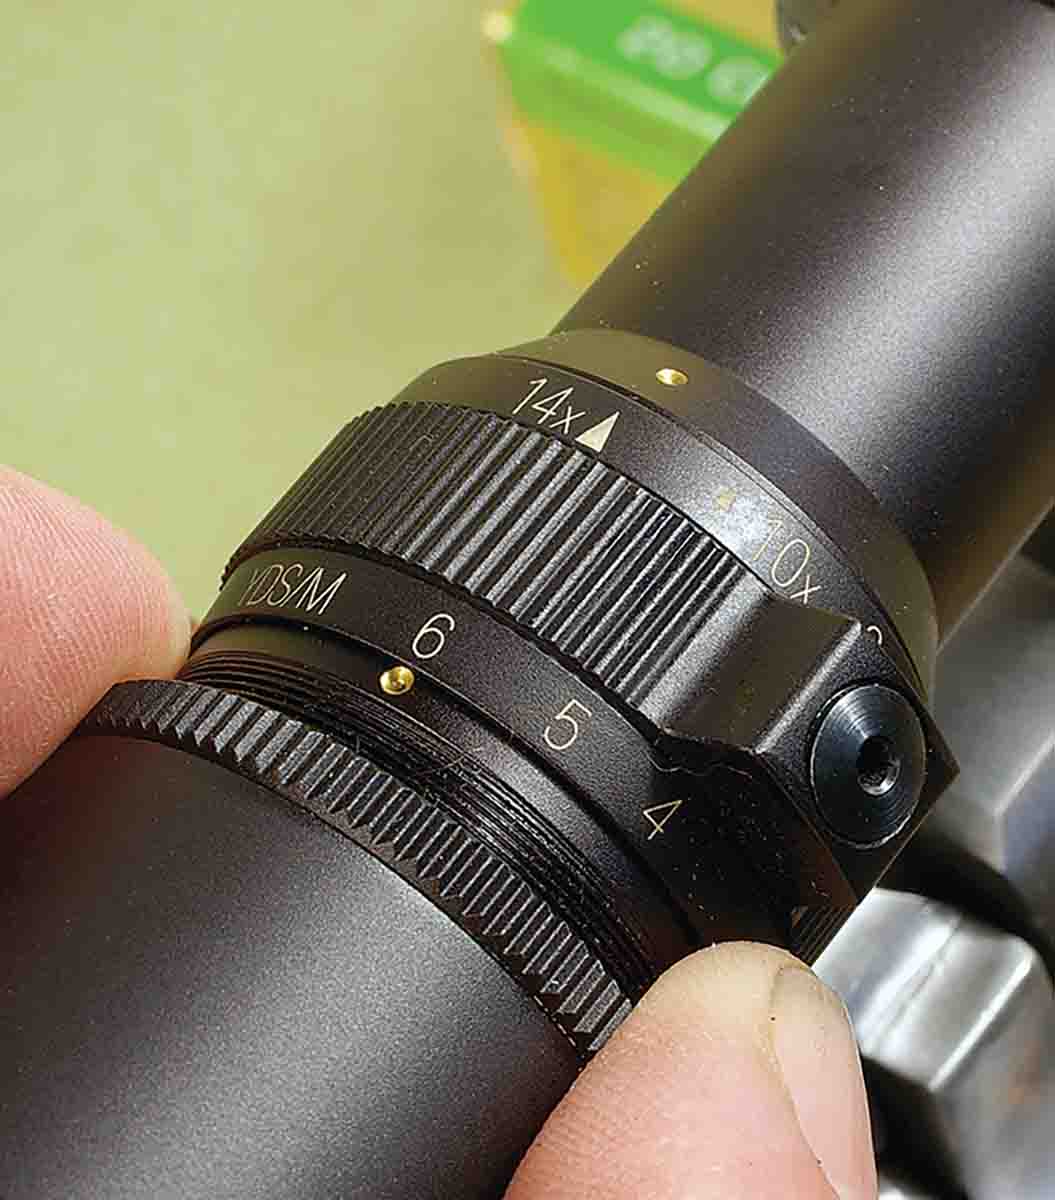 A scope that tops out at 14x offers plenty of magnification for rifles chambered for cartridges like the .223 Remington.